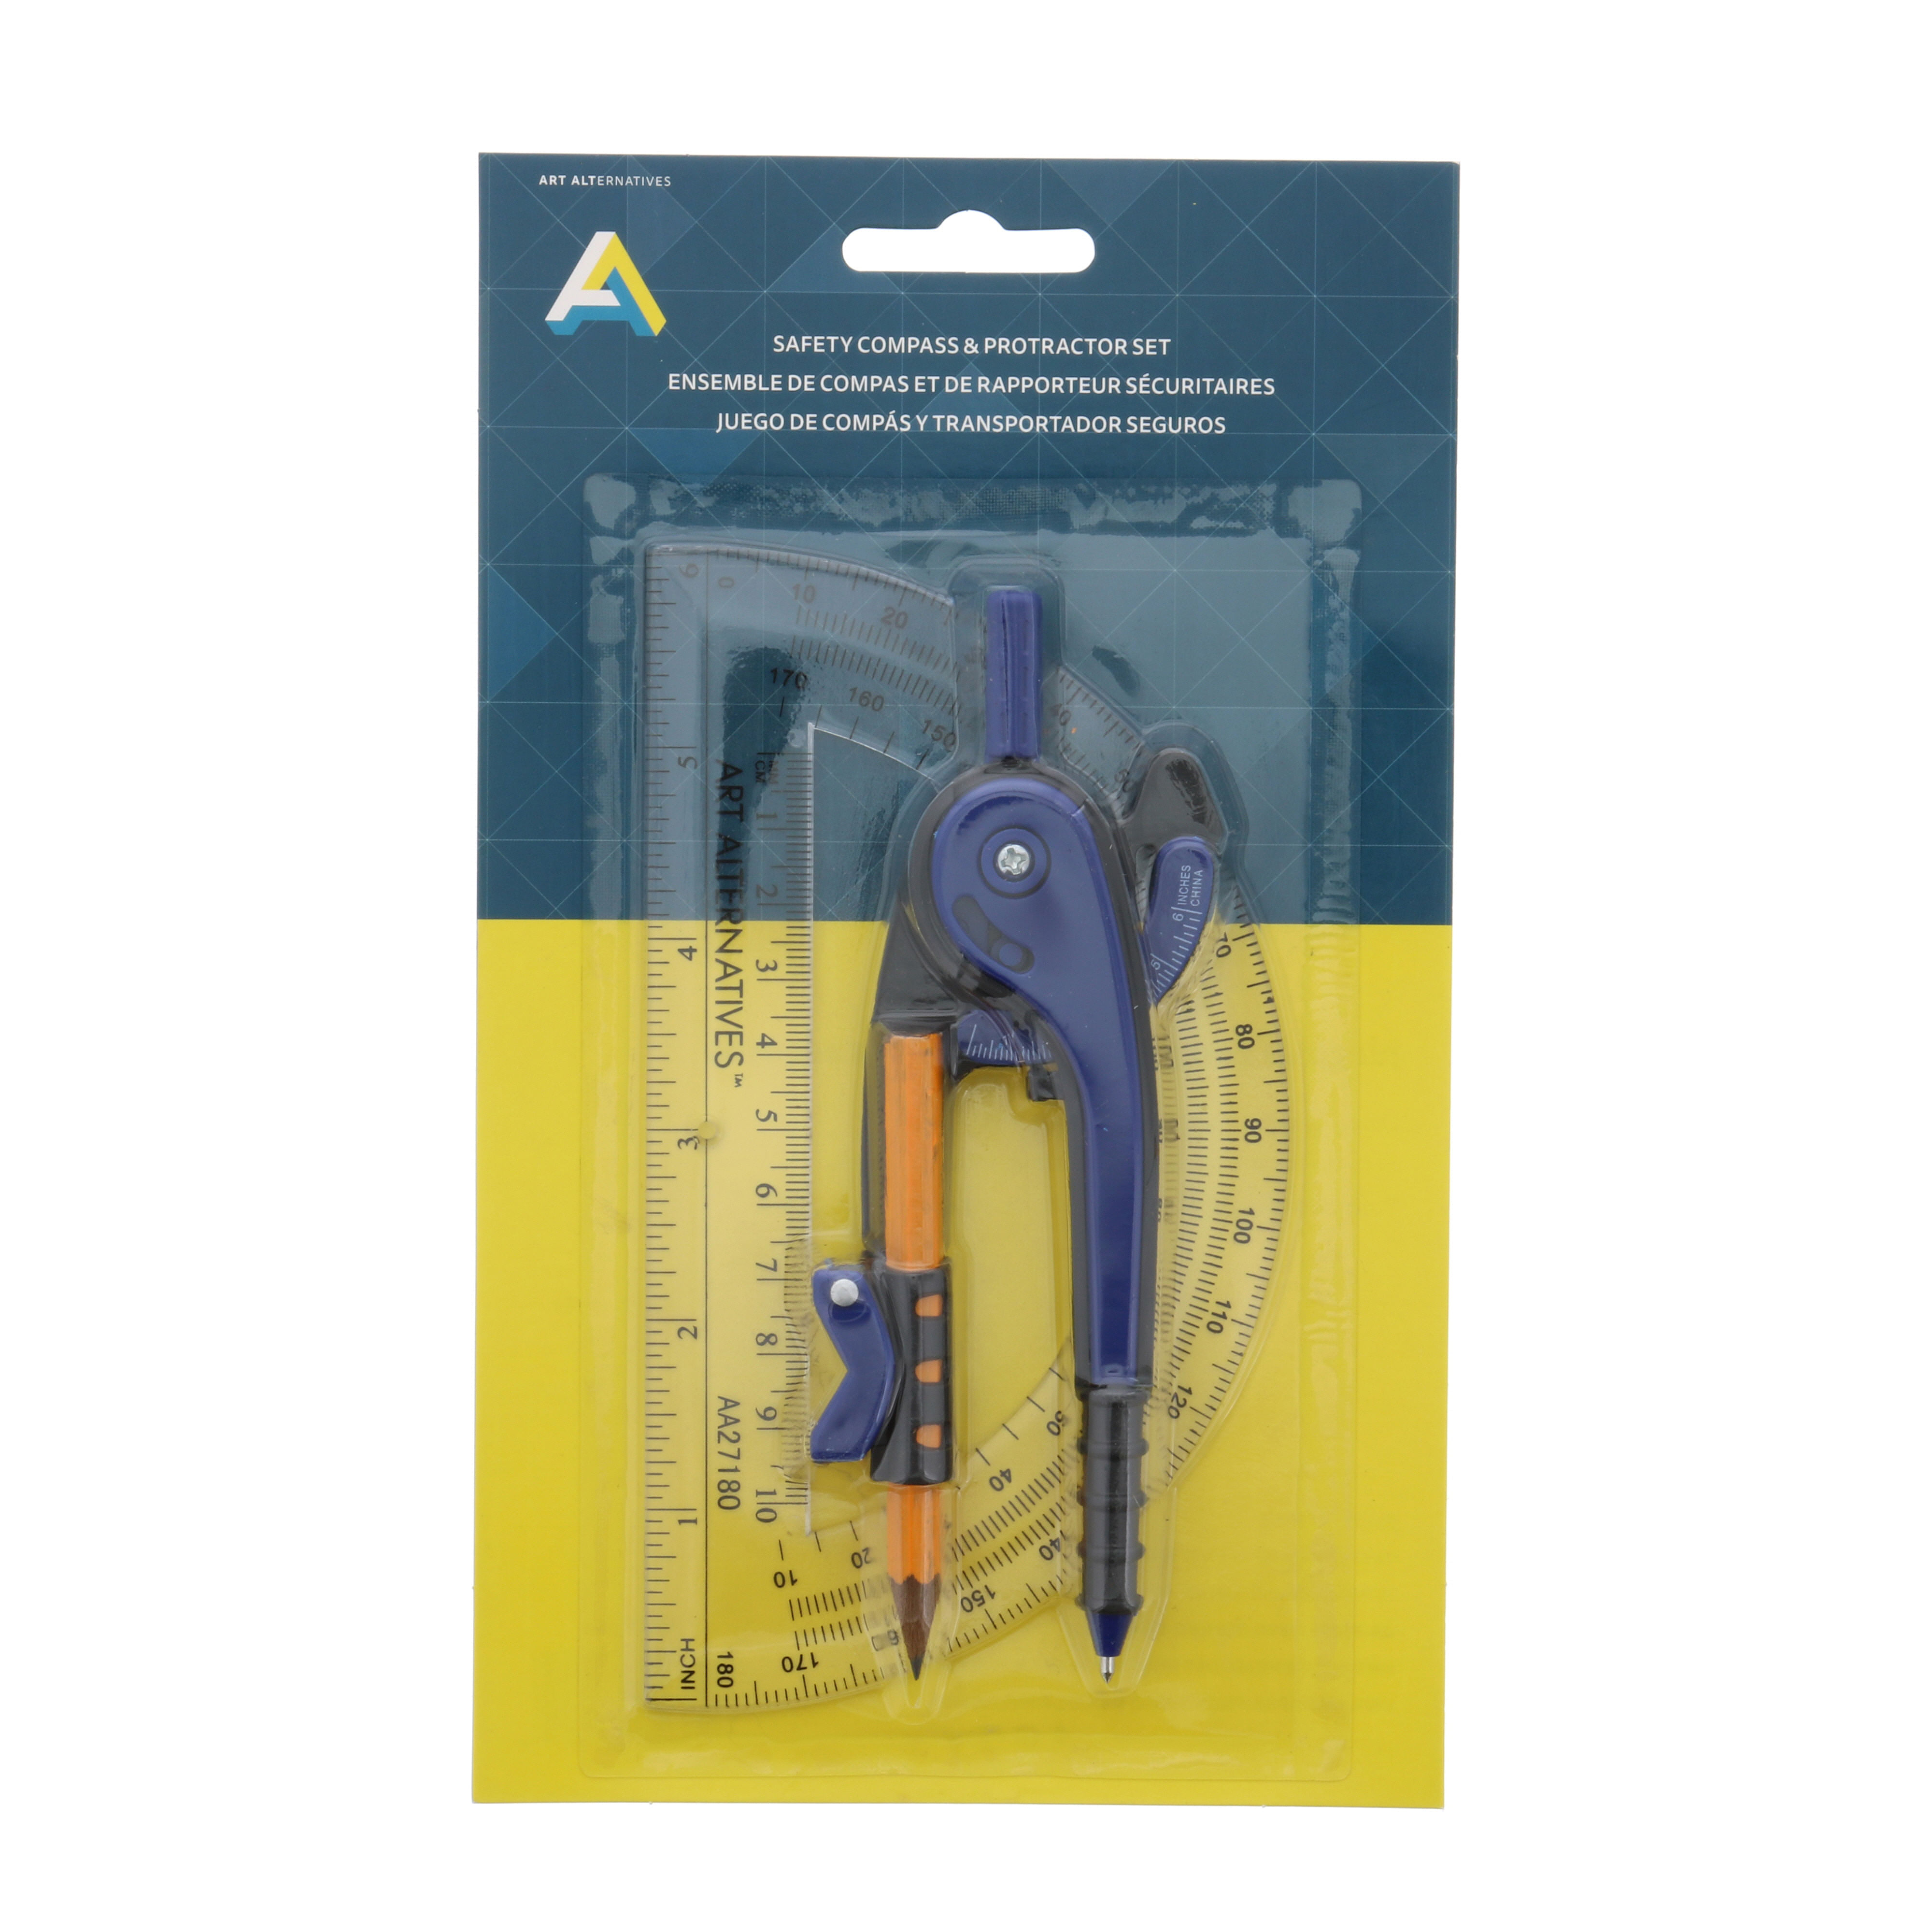 Blue or Orange Safety Compass Ruler & Protractor Set Select Color: Red 